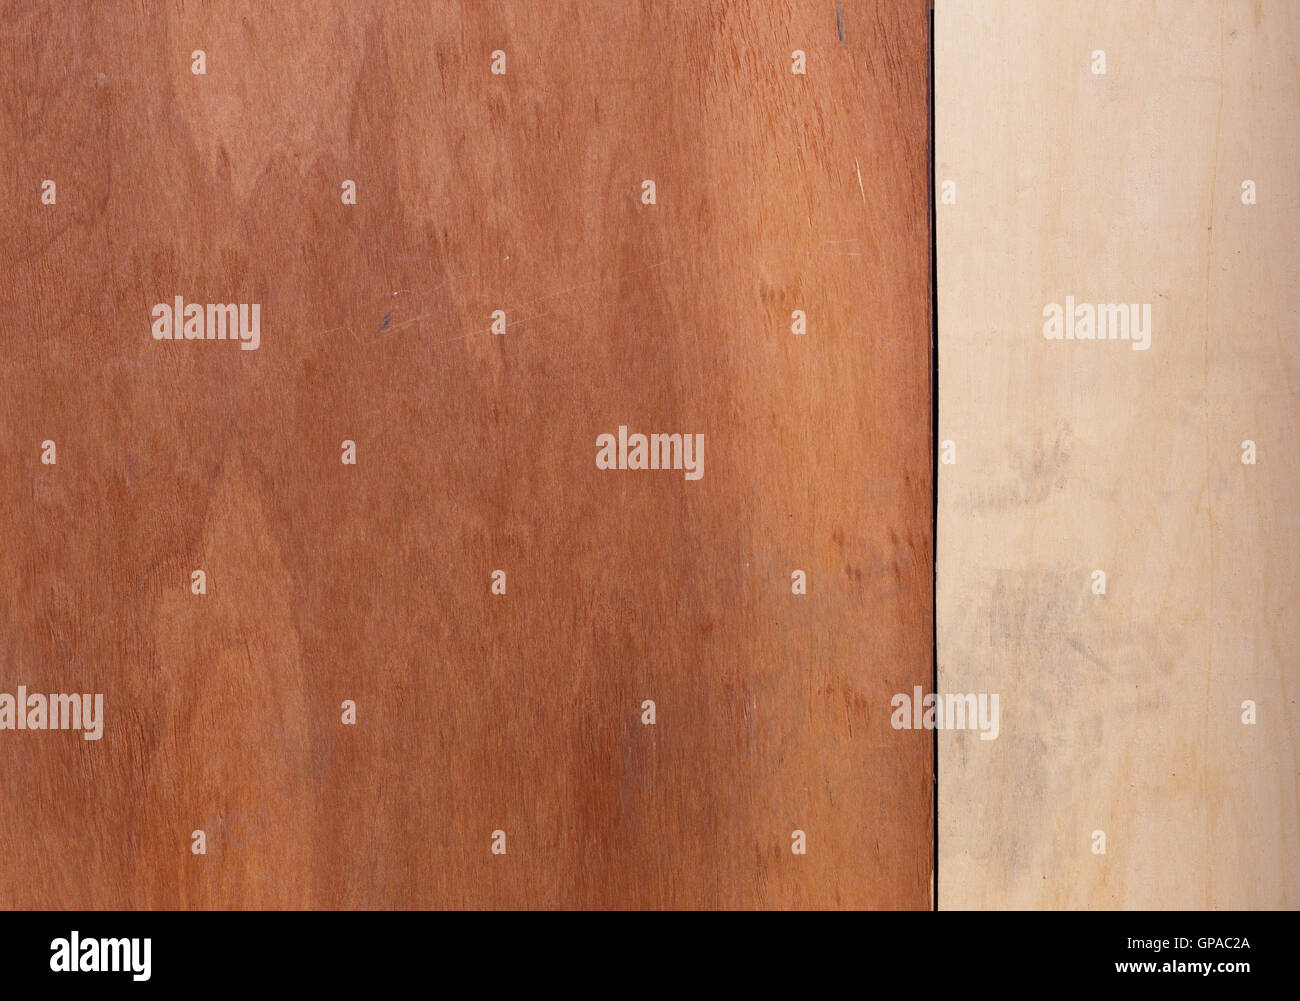 Board up windows with wooden plates decorative woodgrain veneer natural background Stock Photo